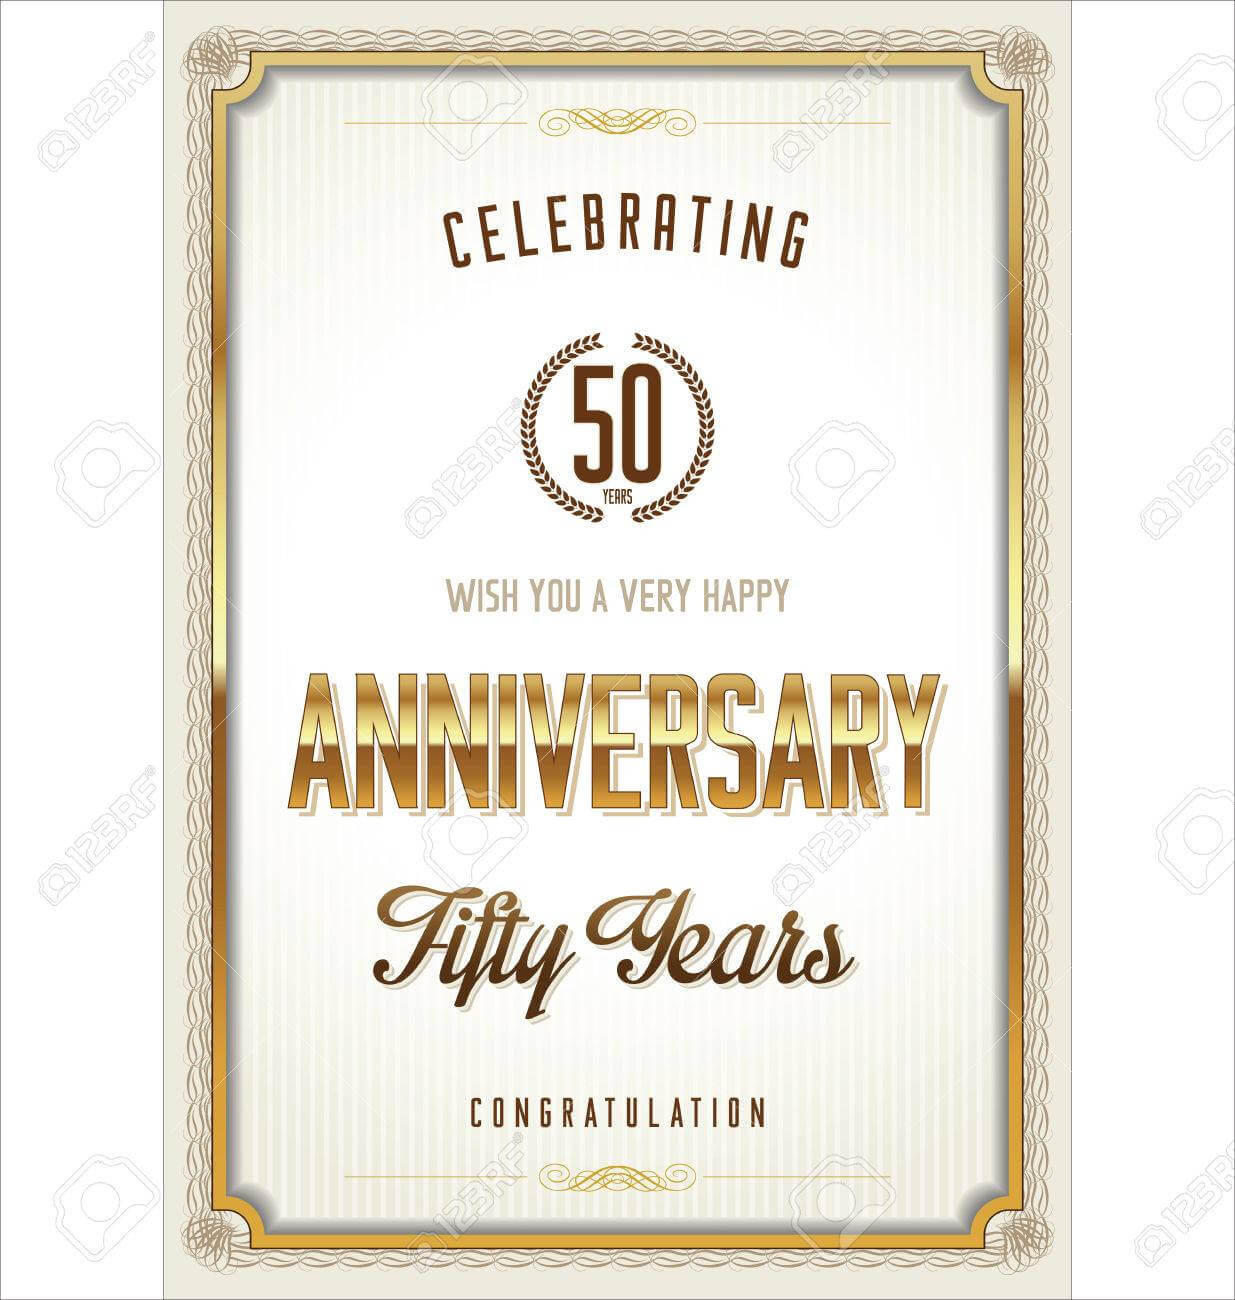 Anniversary Certificate Template Within Anniversary Certificate Template Free